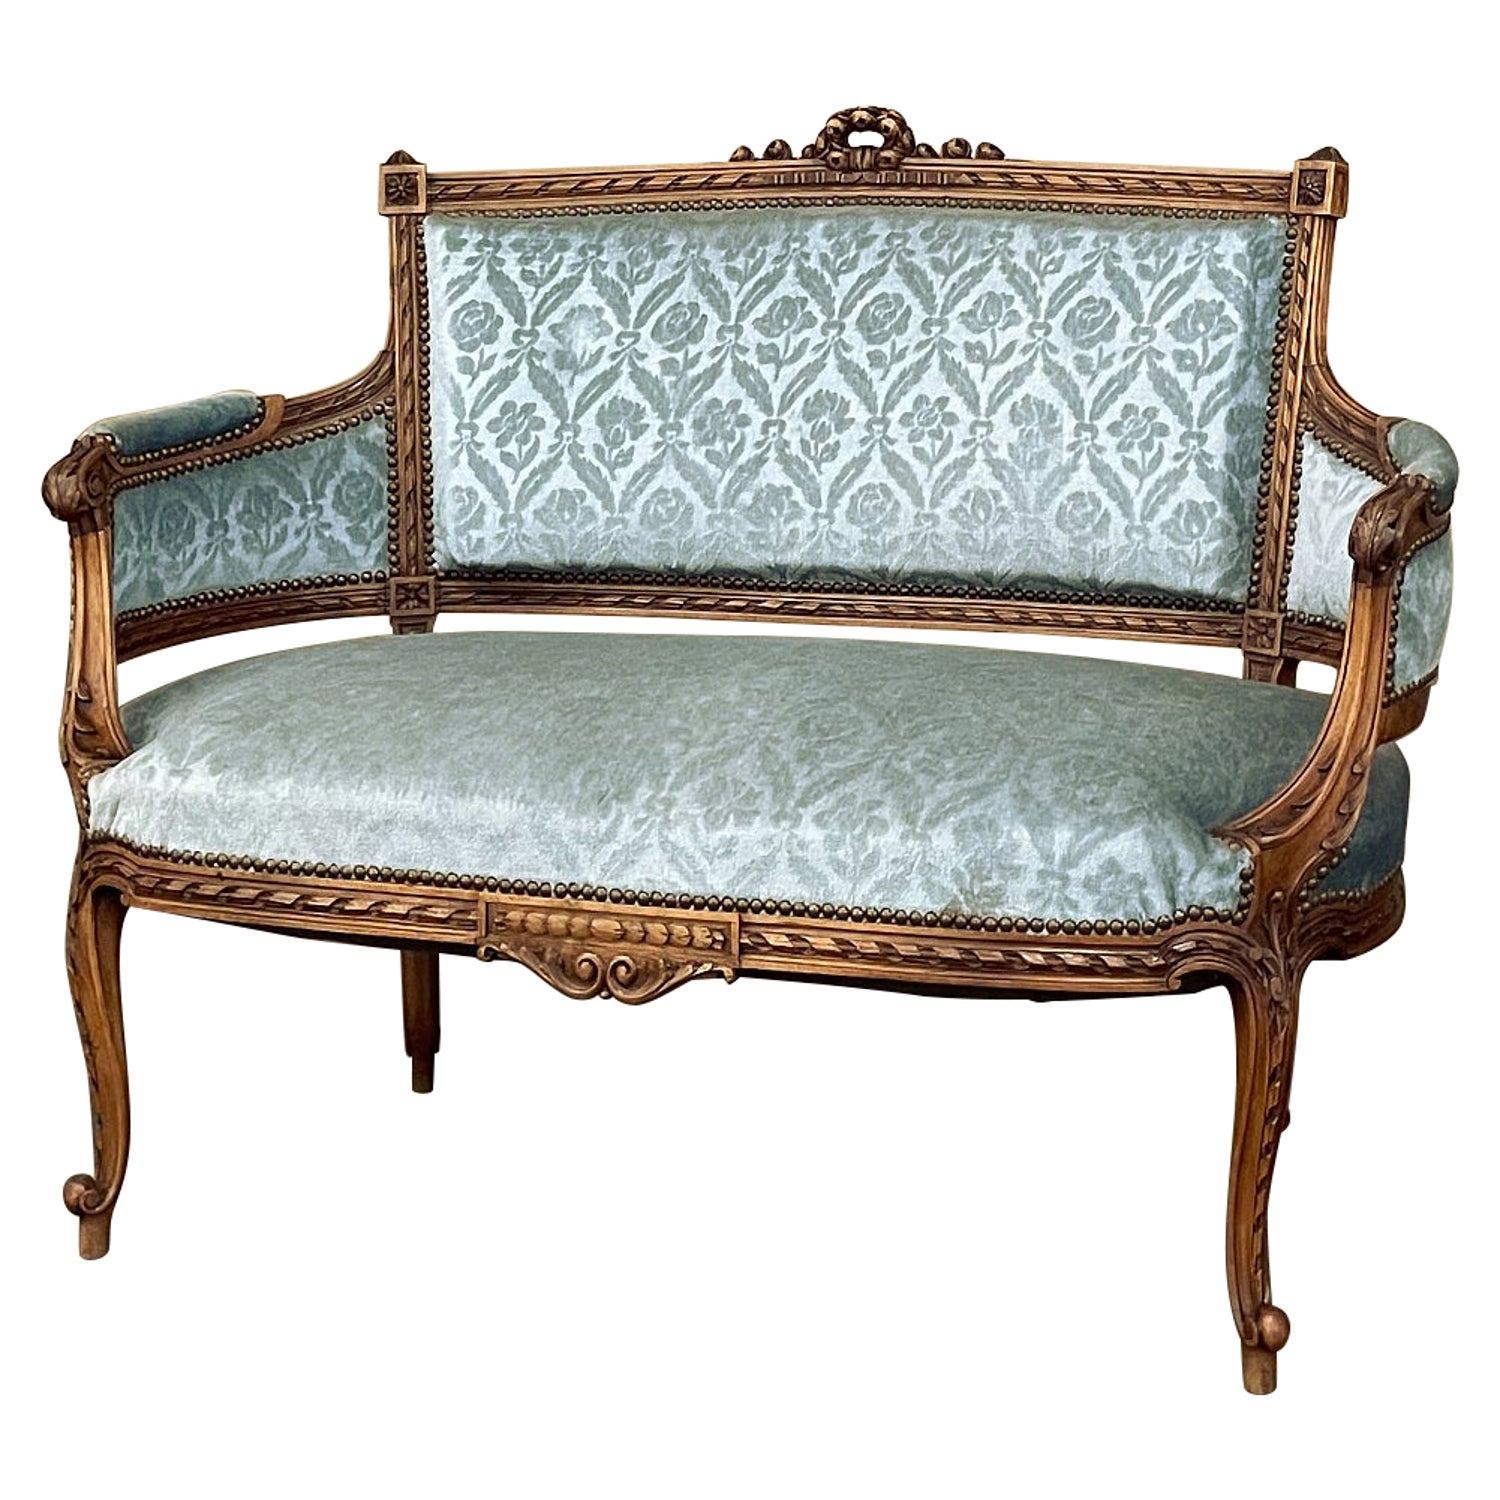 Beautiful Sofa, Canape in the Louis XVI For Sale at 1stDibs